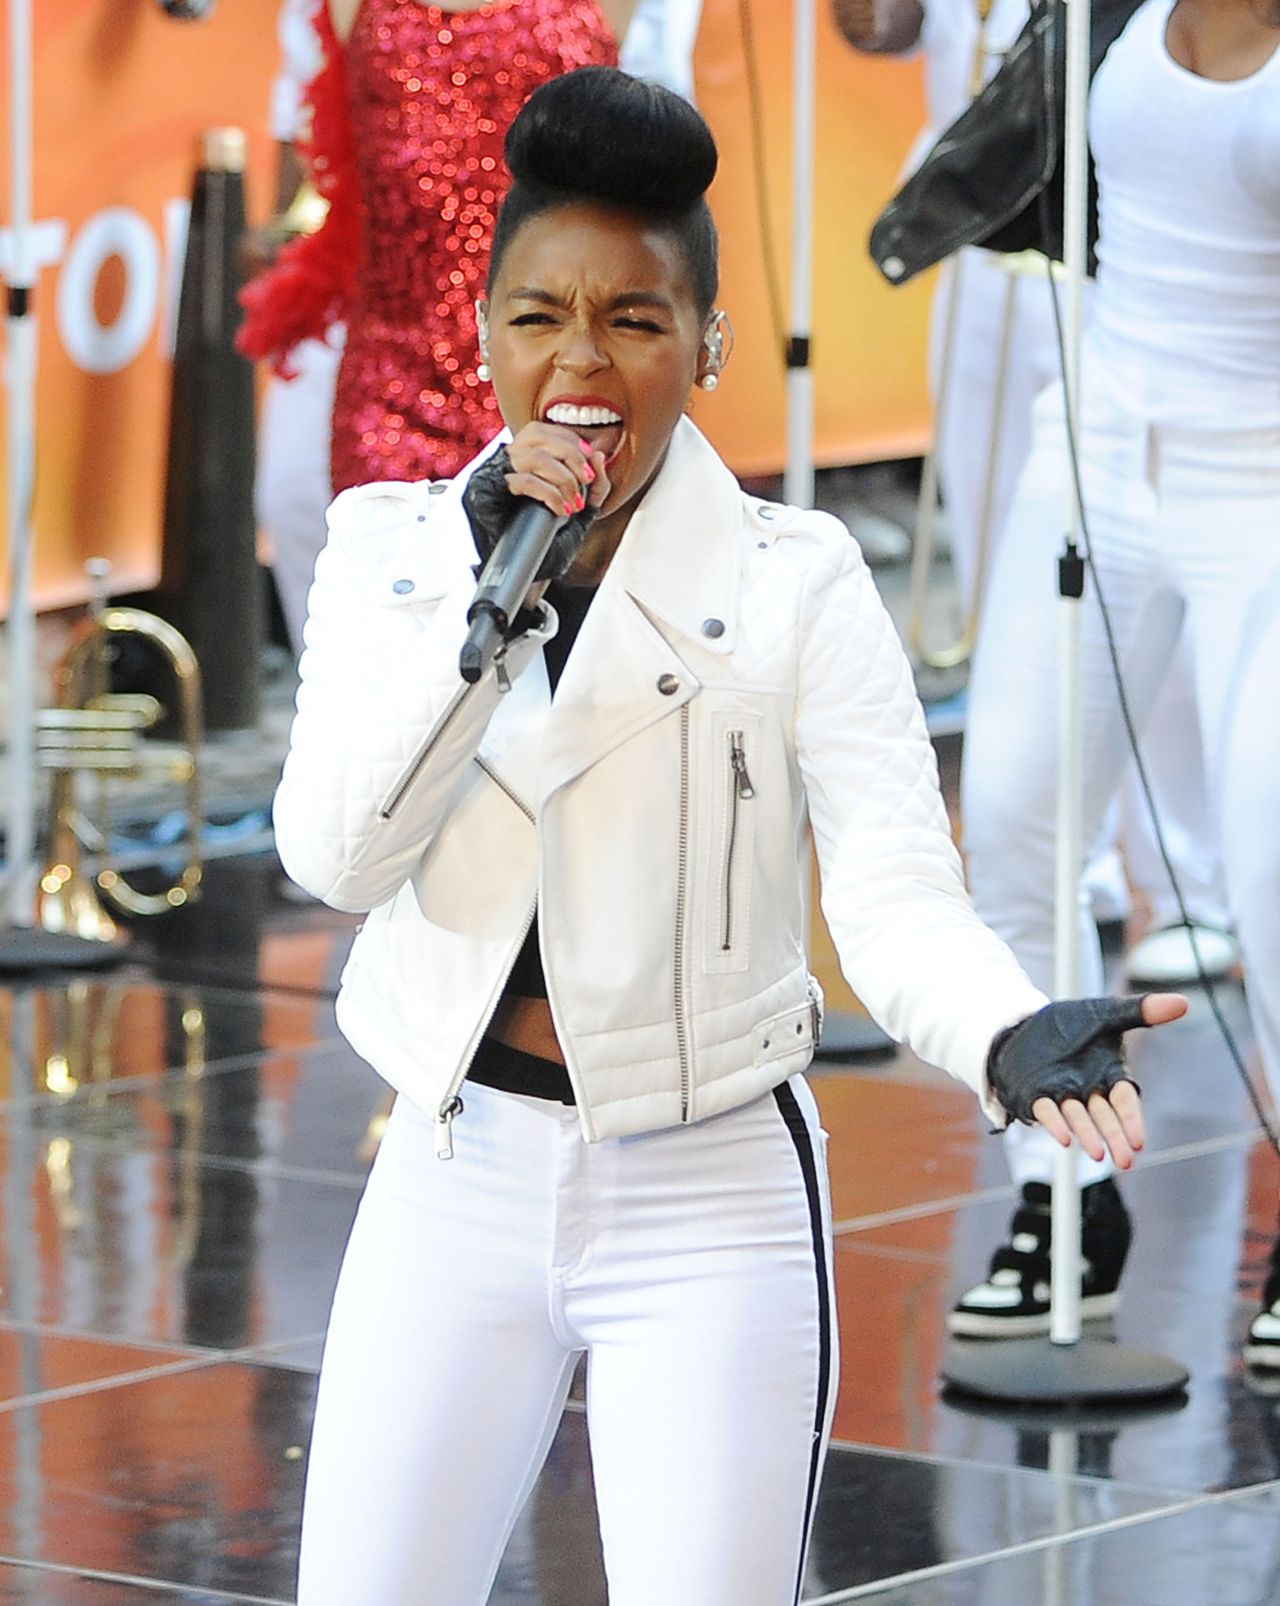 janelle-monae-performs-on-nbc-s-today-april-2014_5.